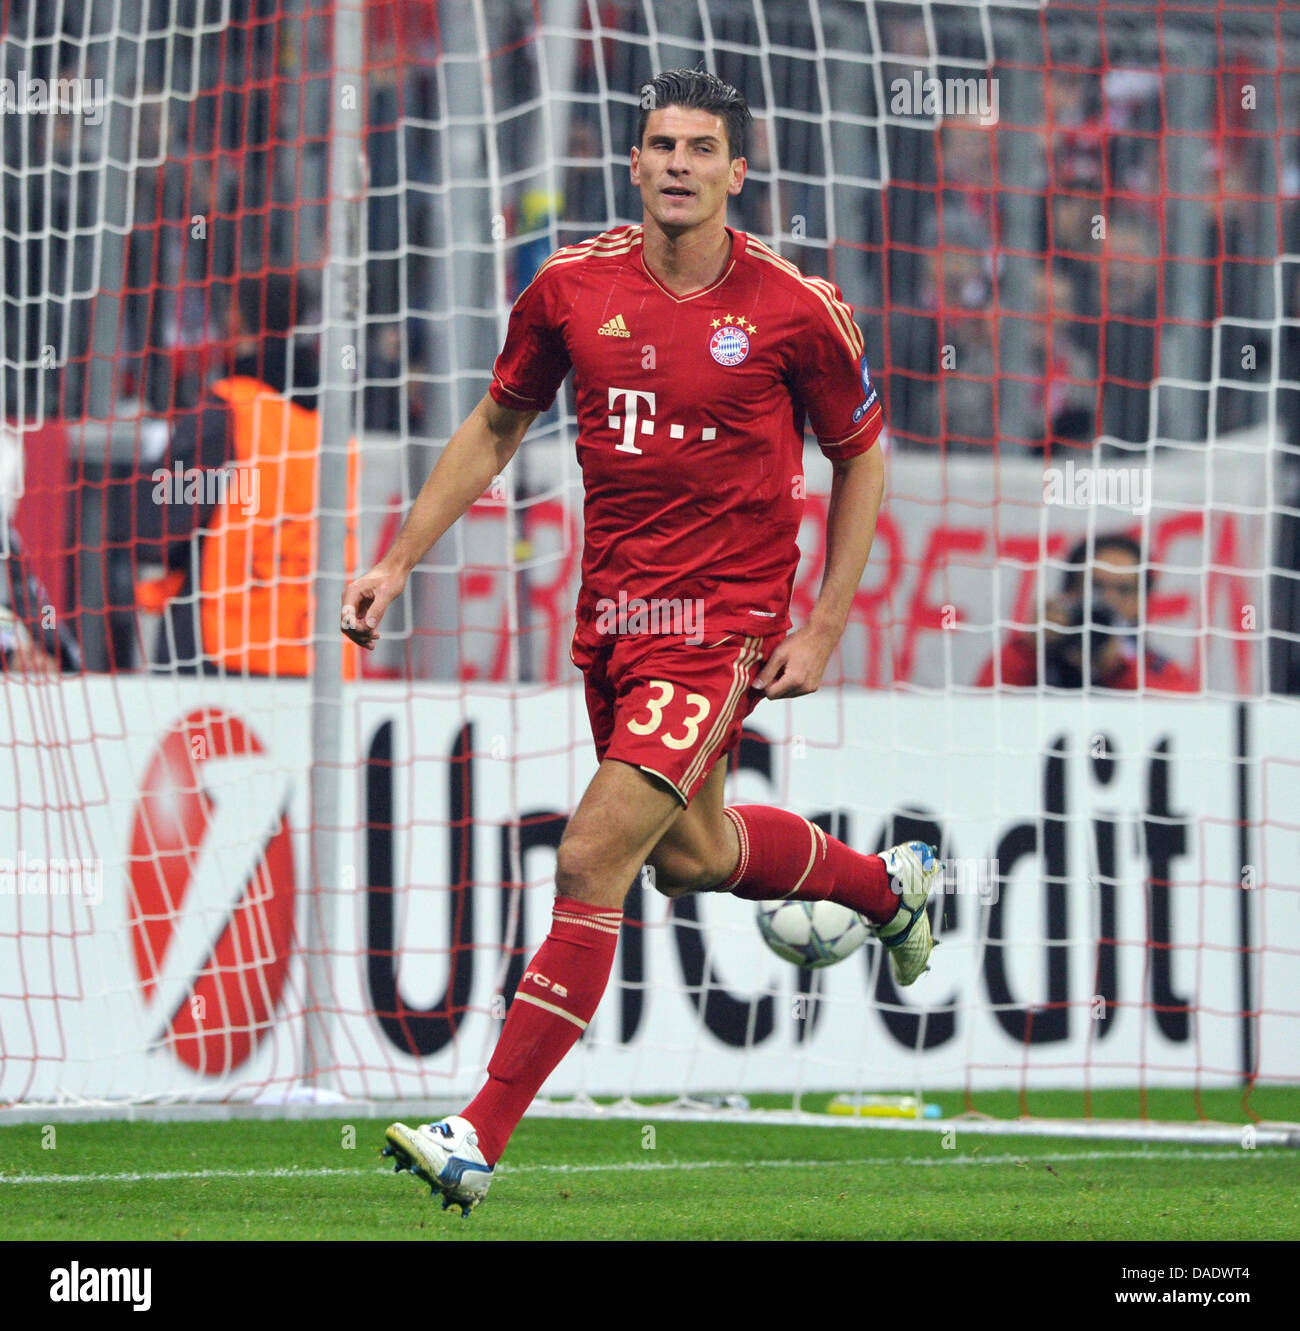 Bayern Munich's Mario Gomez cheers after scoring the 2-0 goal during the  first half of the Champions League group A match between FC Bayern Munich  and SSC Neapel at the Allianzarena stadium